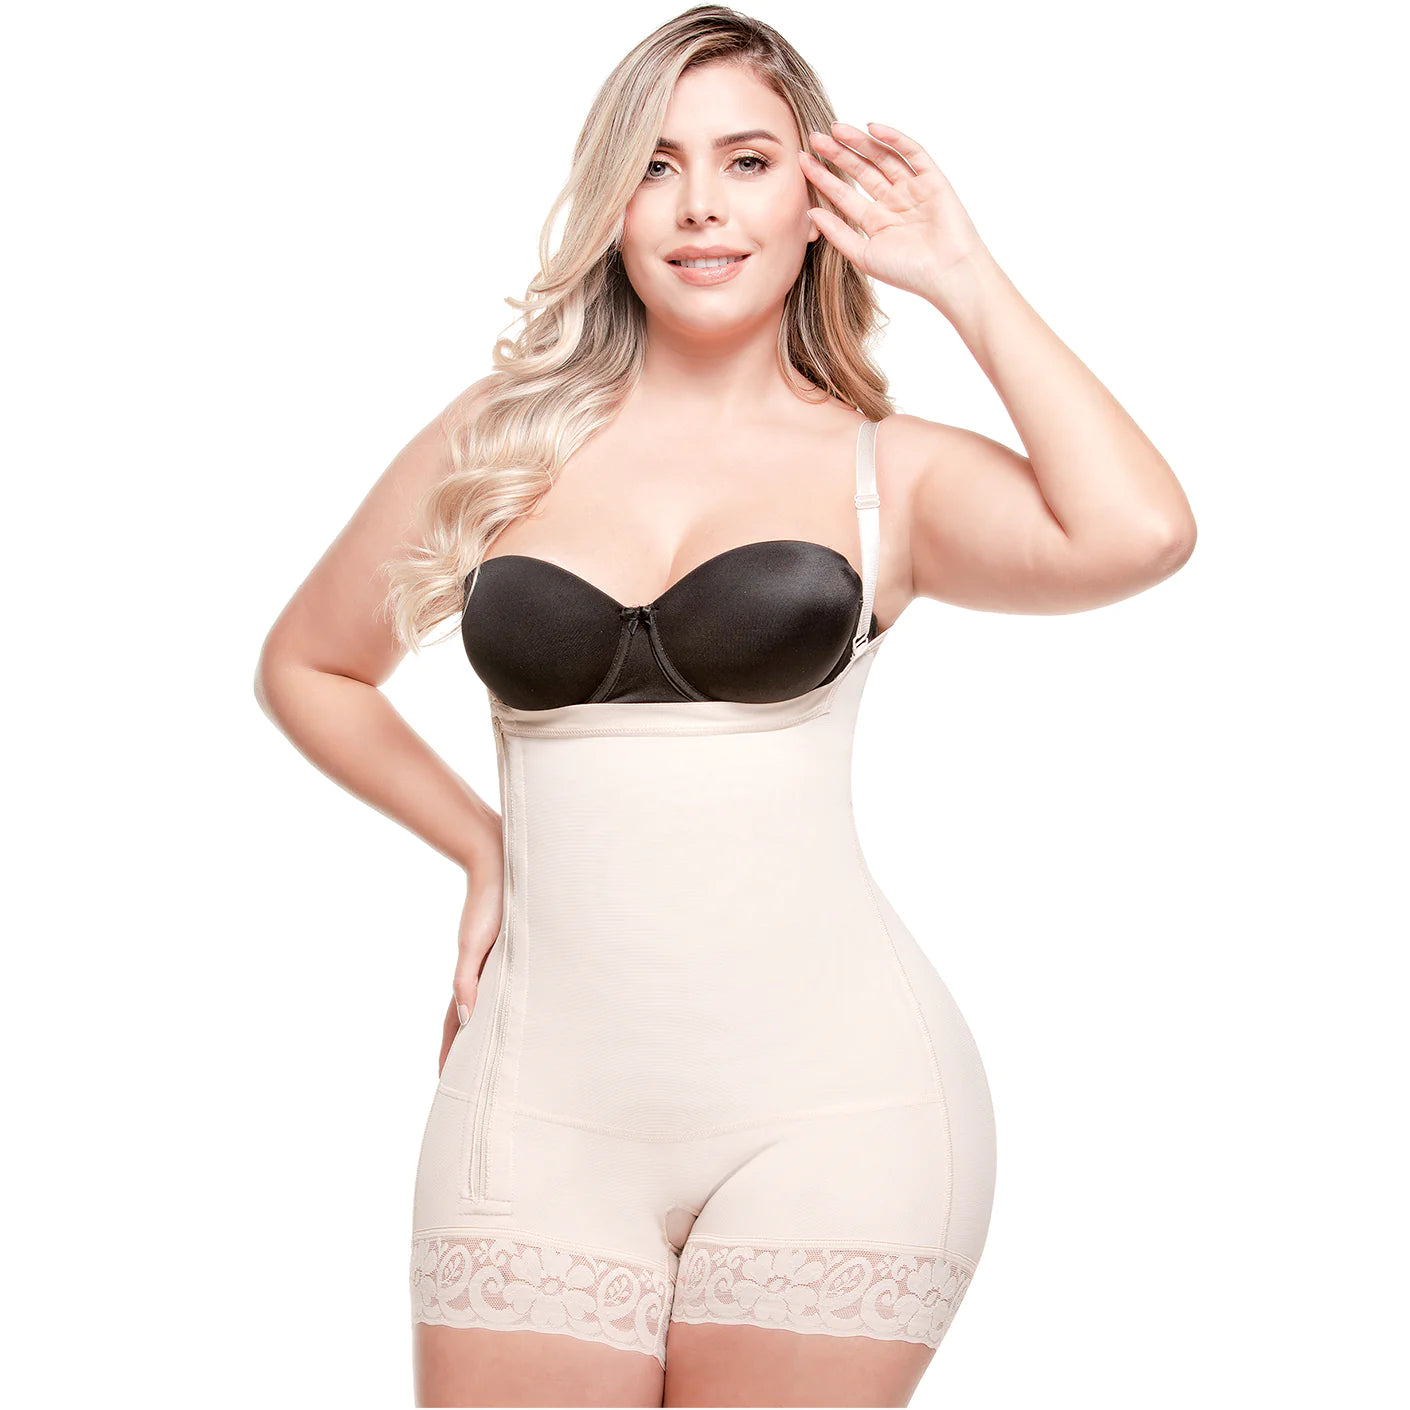 Strapless Colombian Girdles – Tagged cuerpo completo – Fajas